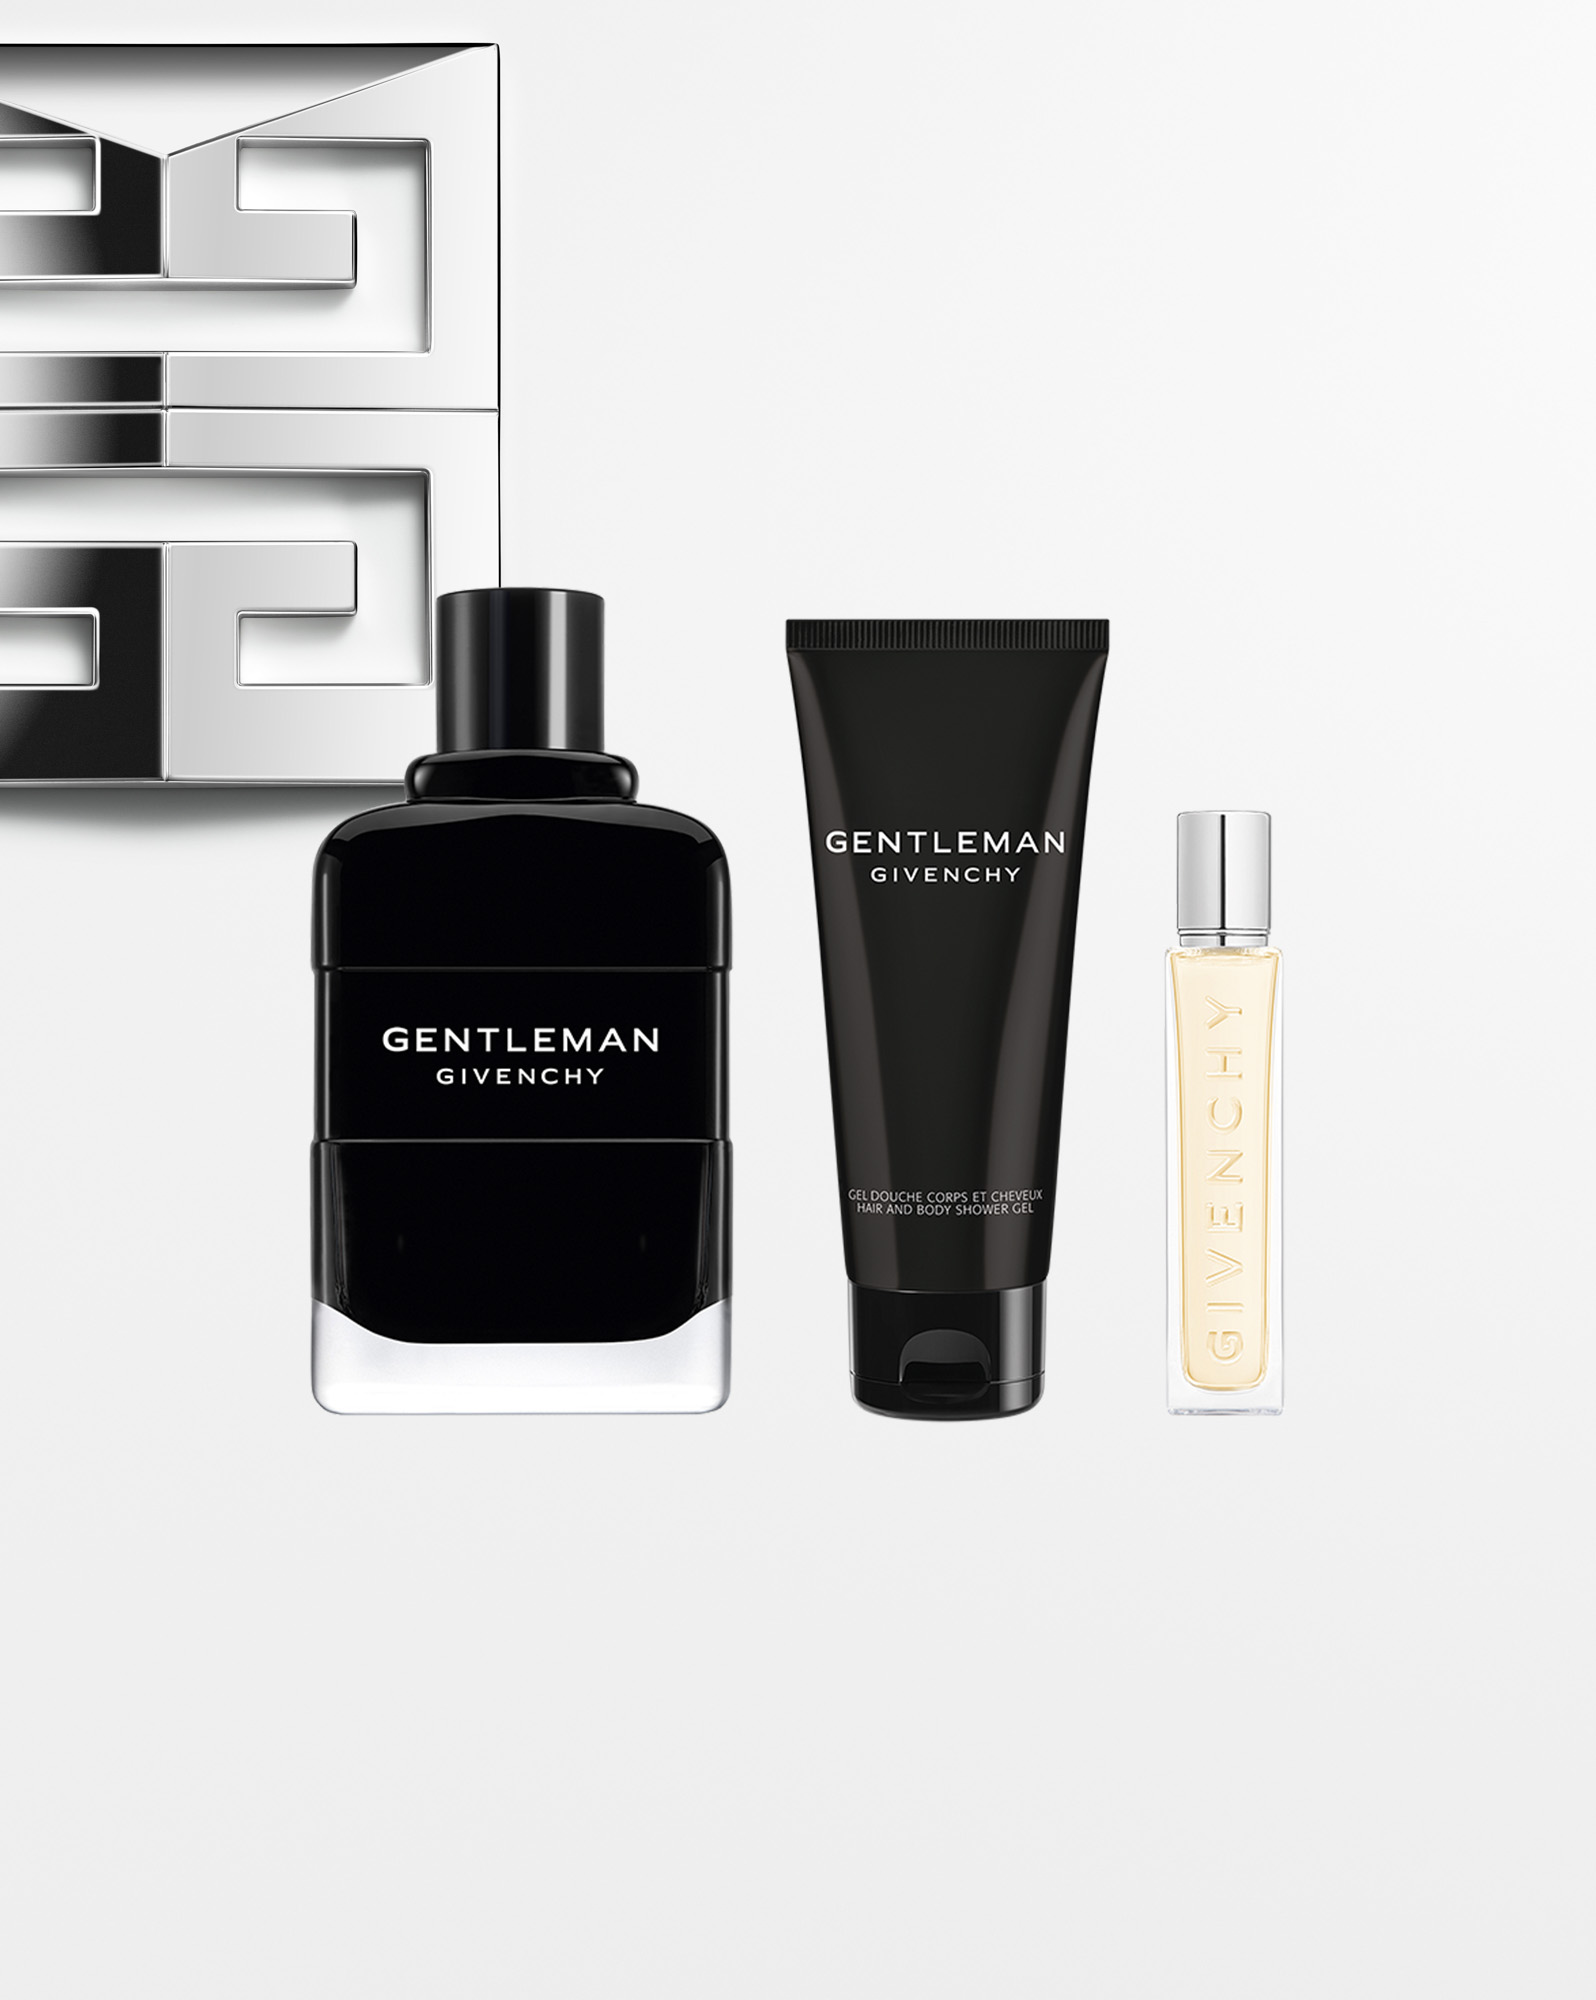 Gentleman Givenchy Father's day gift set